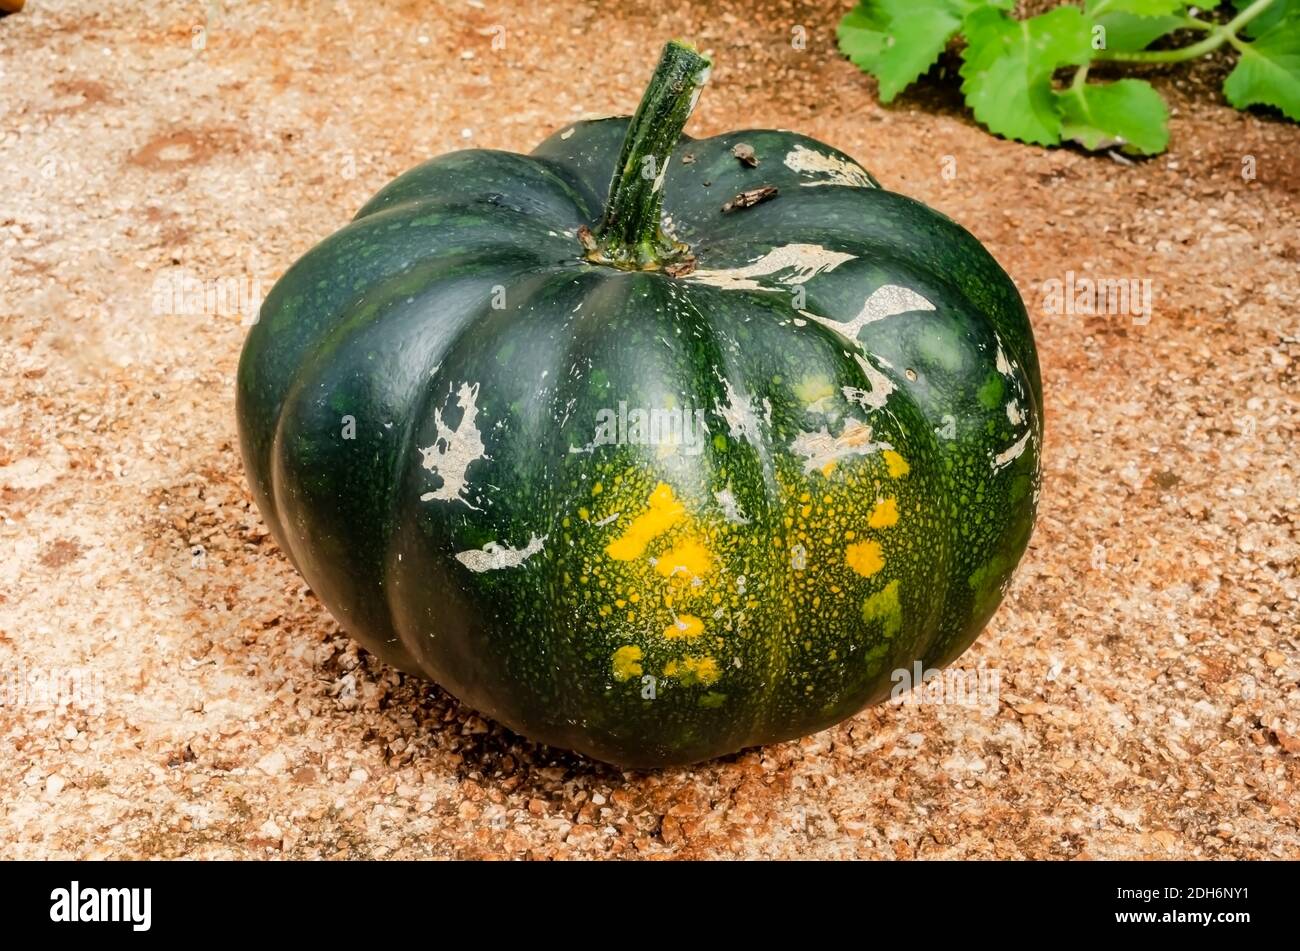 Outside on a concrete surface is a whole round kalabasa pumpkin with its stem in tact. Stock Photo